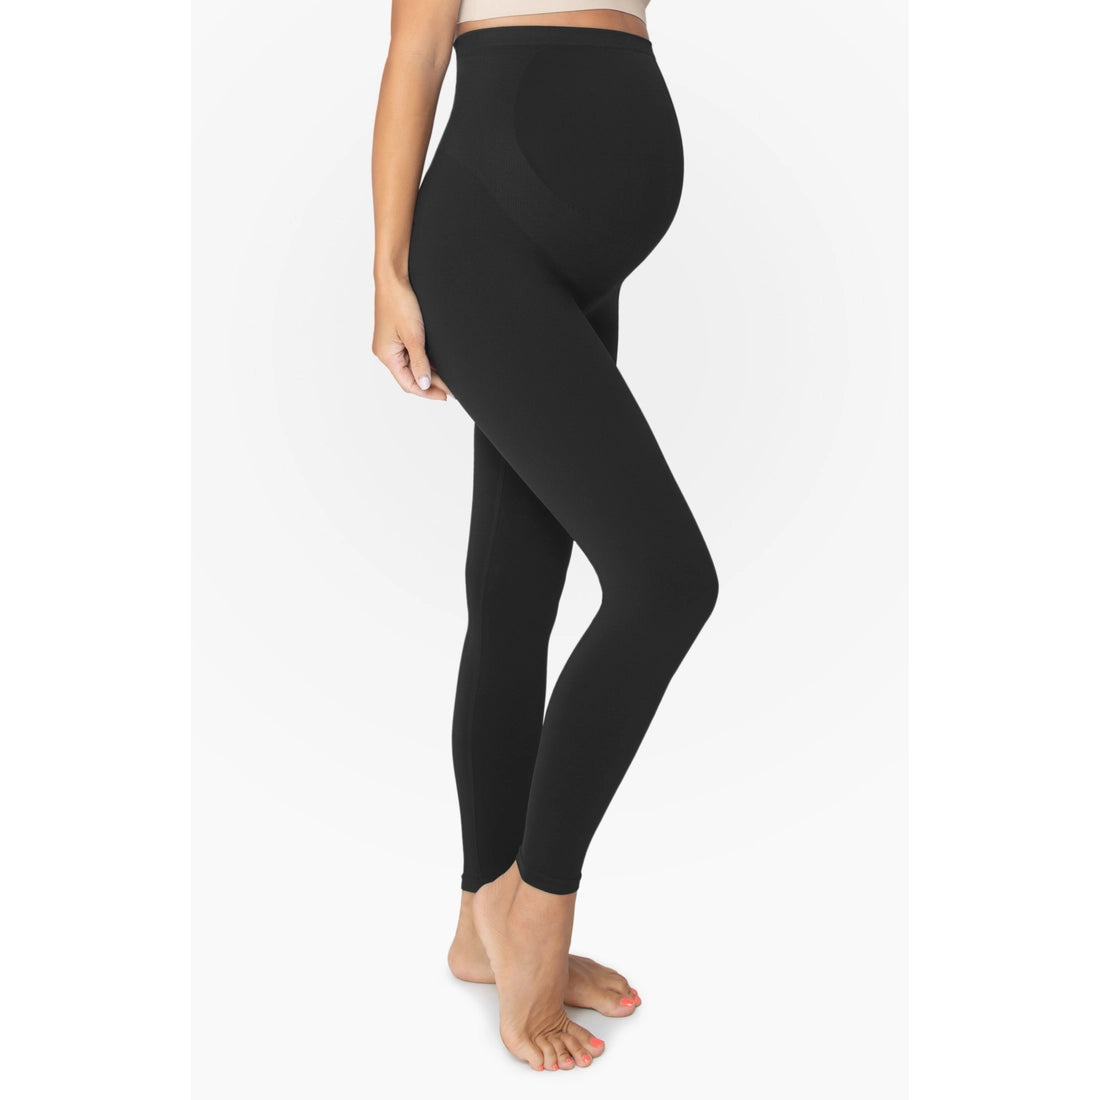 Steele Belly Bandit Maternity Bump Support Legging